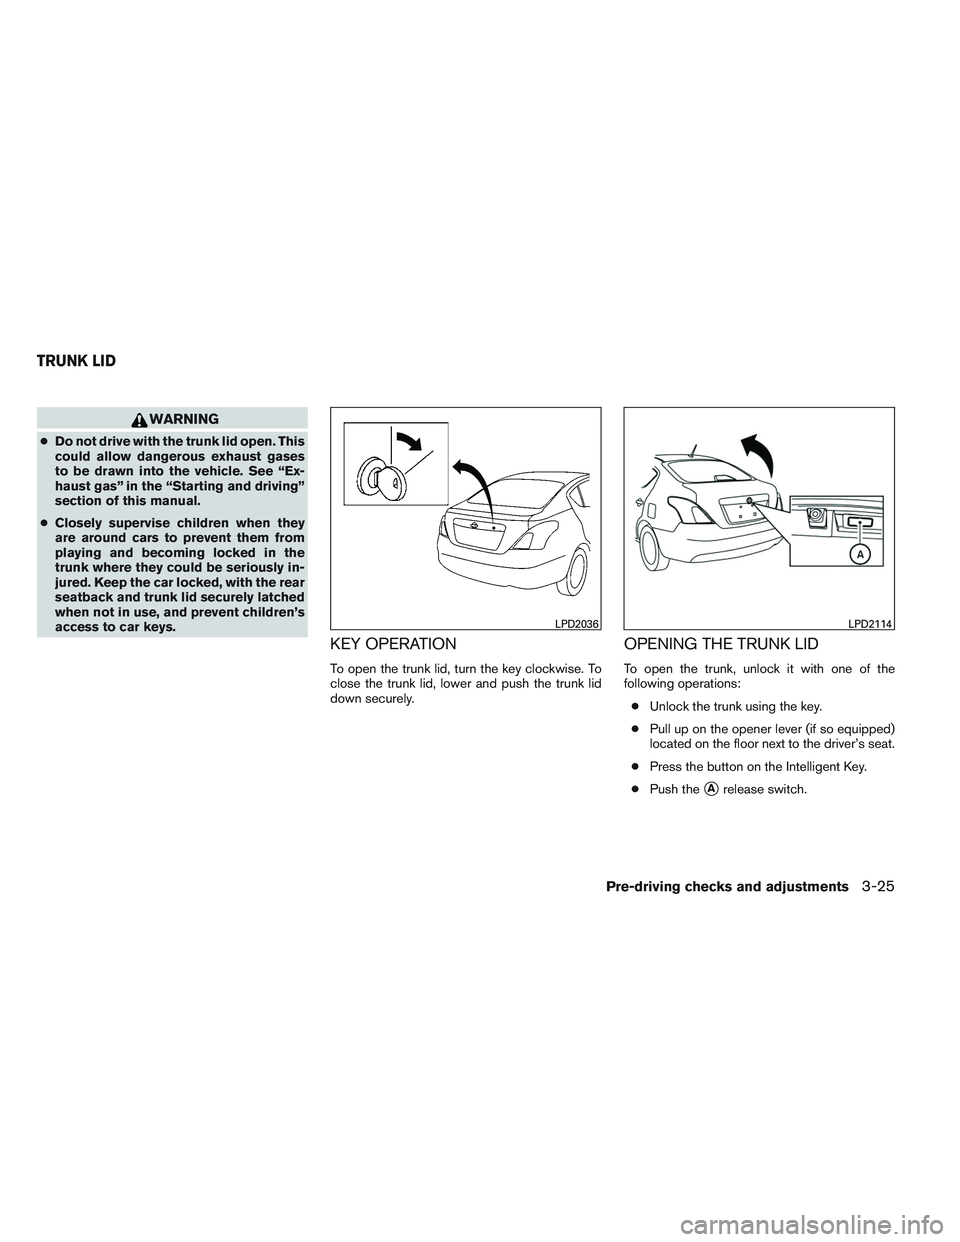 NISSAN VERSA 2013  Owners Manual WARNING
●Do not drive with the trunk lid open. This
could allow dangerous exhaust gases
to be drawn into the vehicle. See “Ex-
haust gas” in the “Starting and driving”
section of this manual